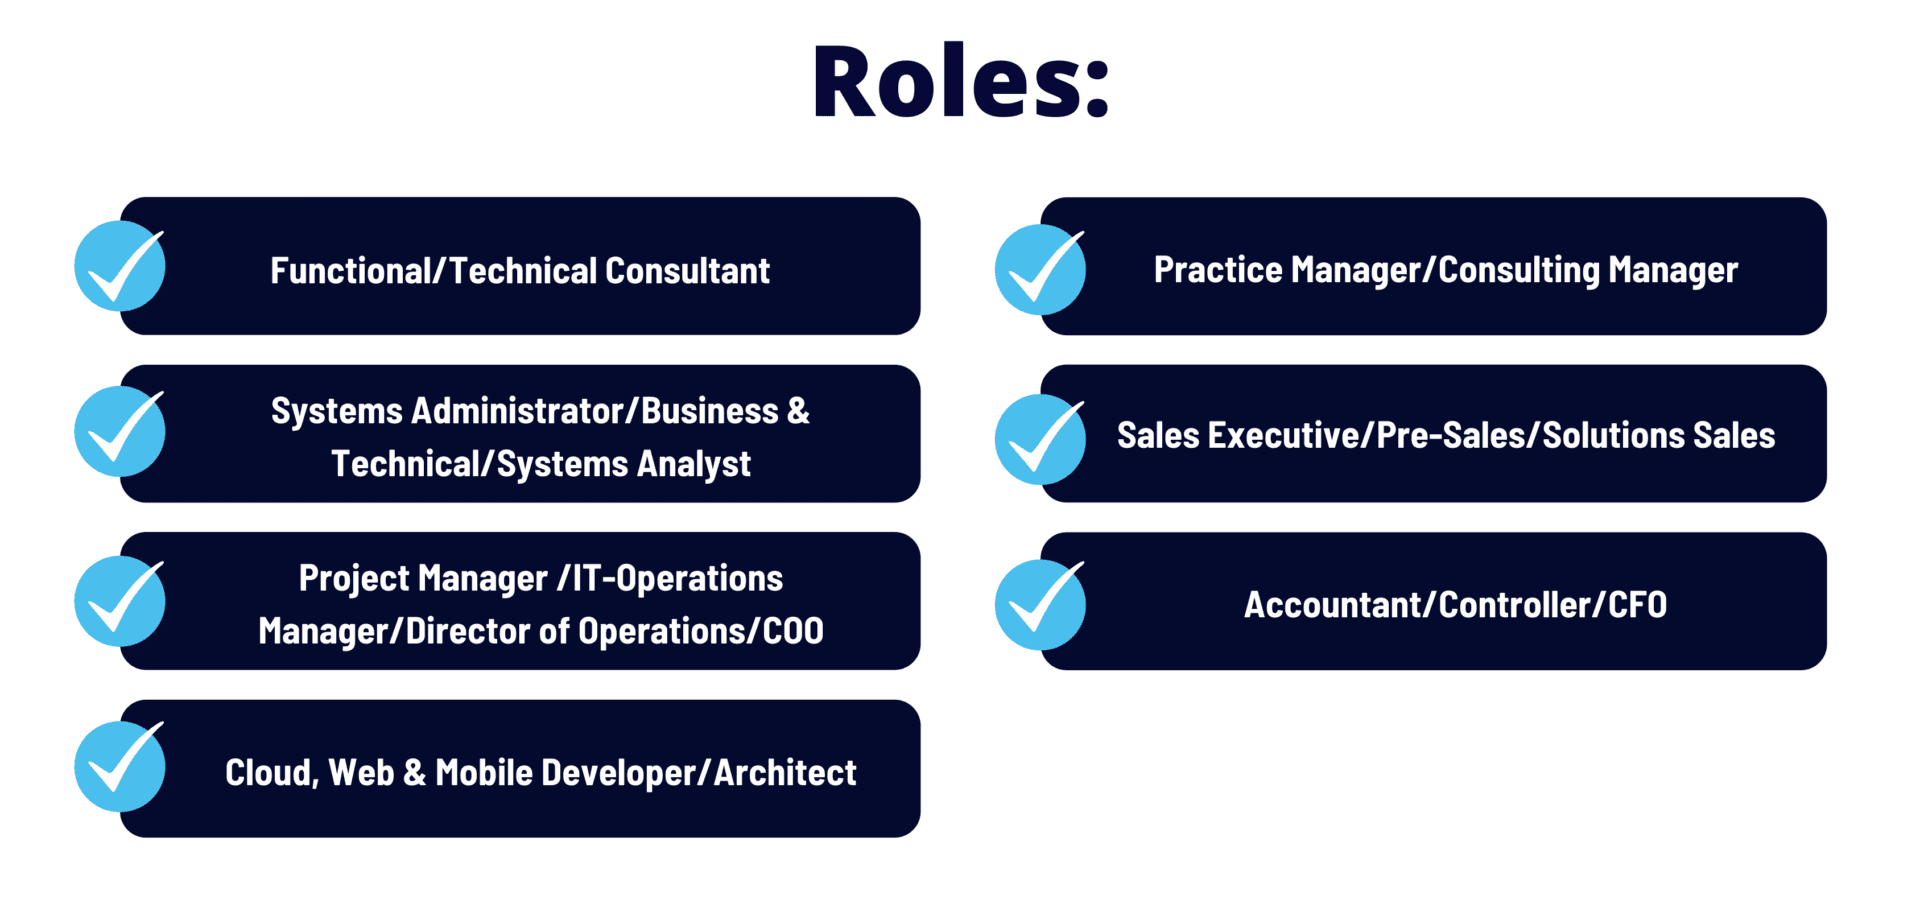 ERP Functional Consultant, Systems Administrator, Business Analyst, Project Manager, IT Manager, Developer, Architect, Sales Executive, Accountant, Controller, CFO